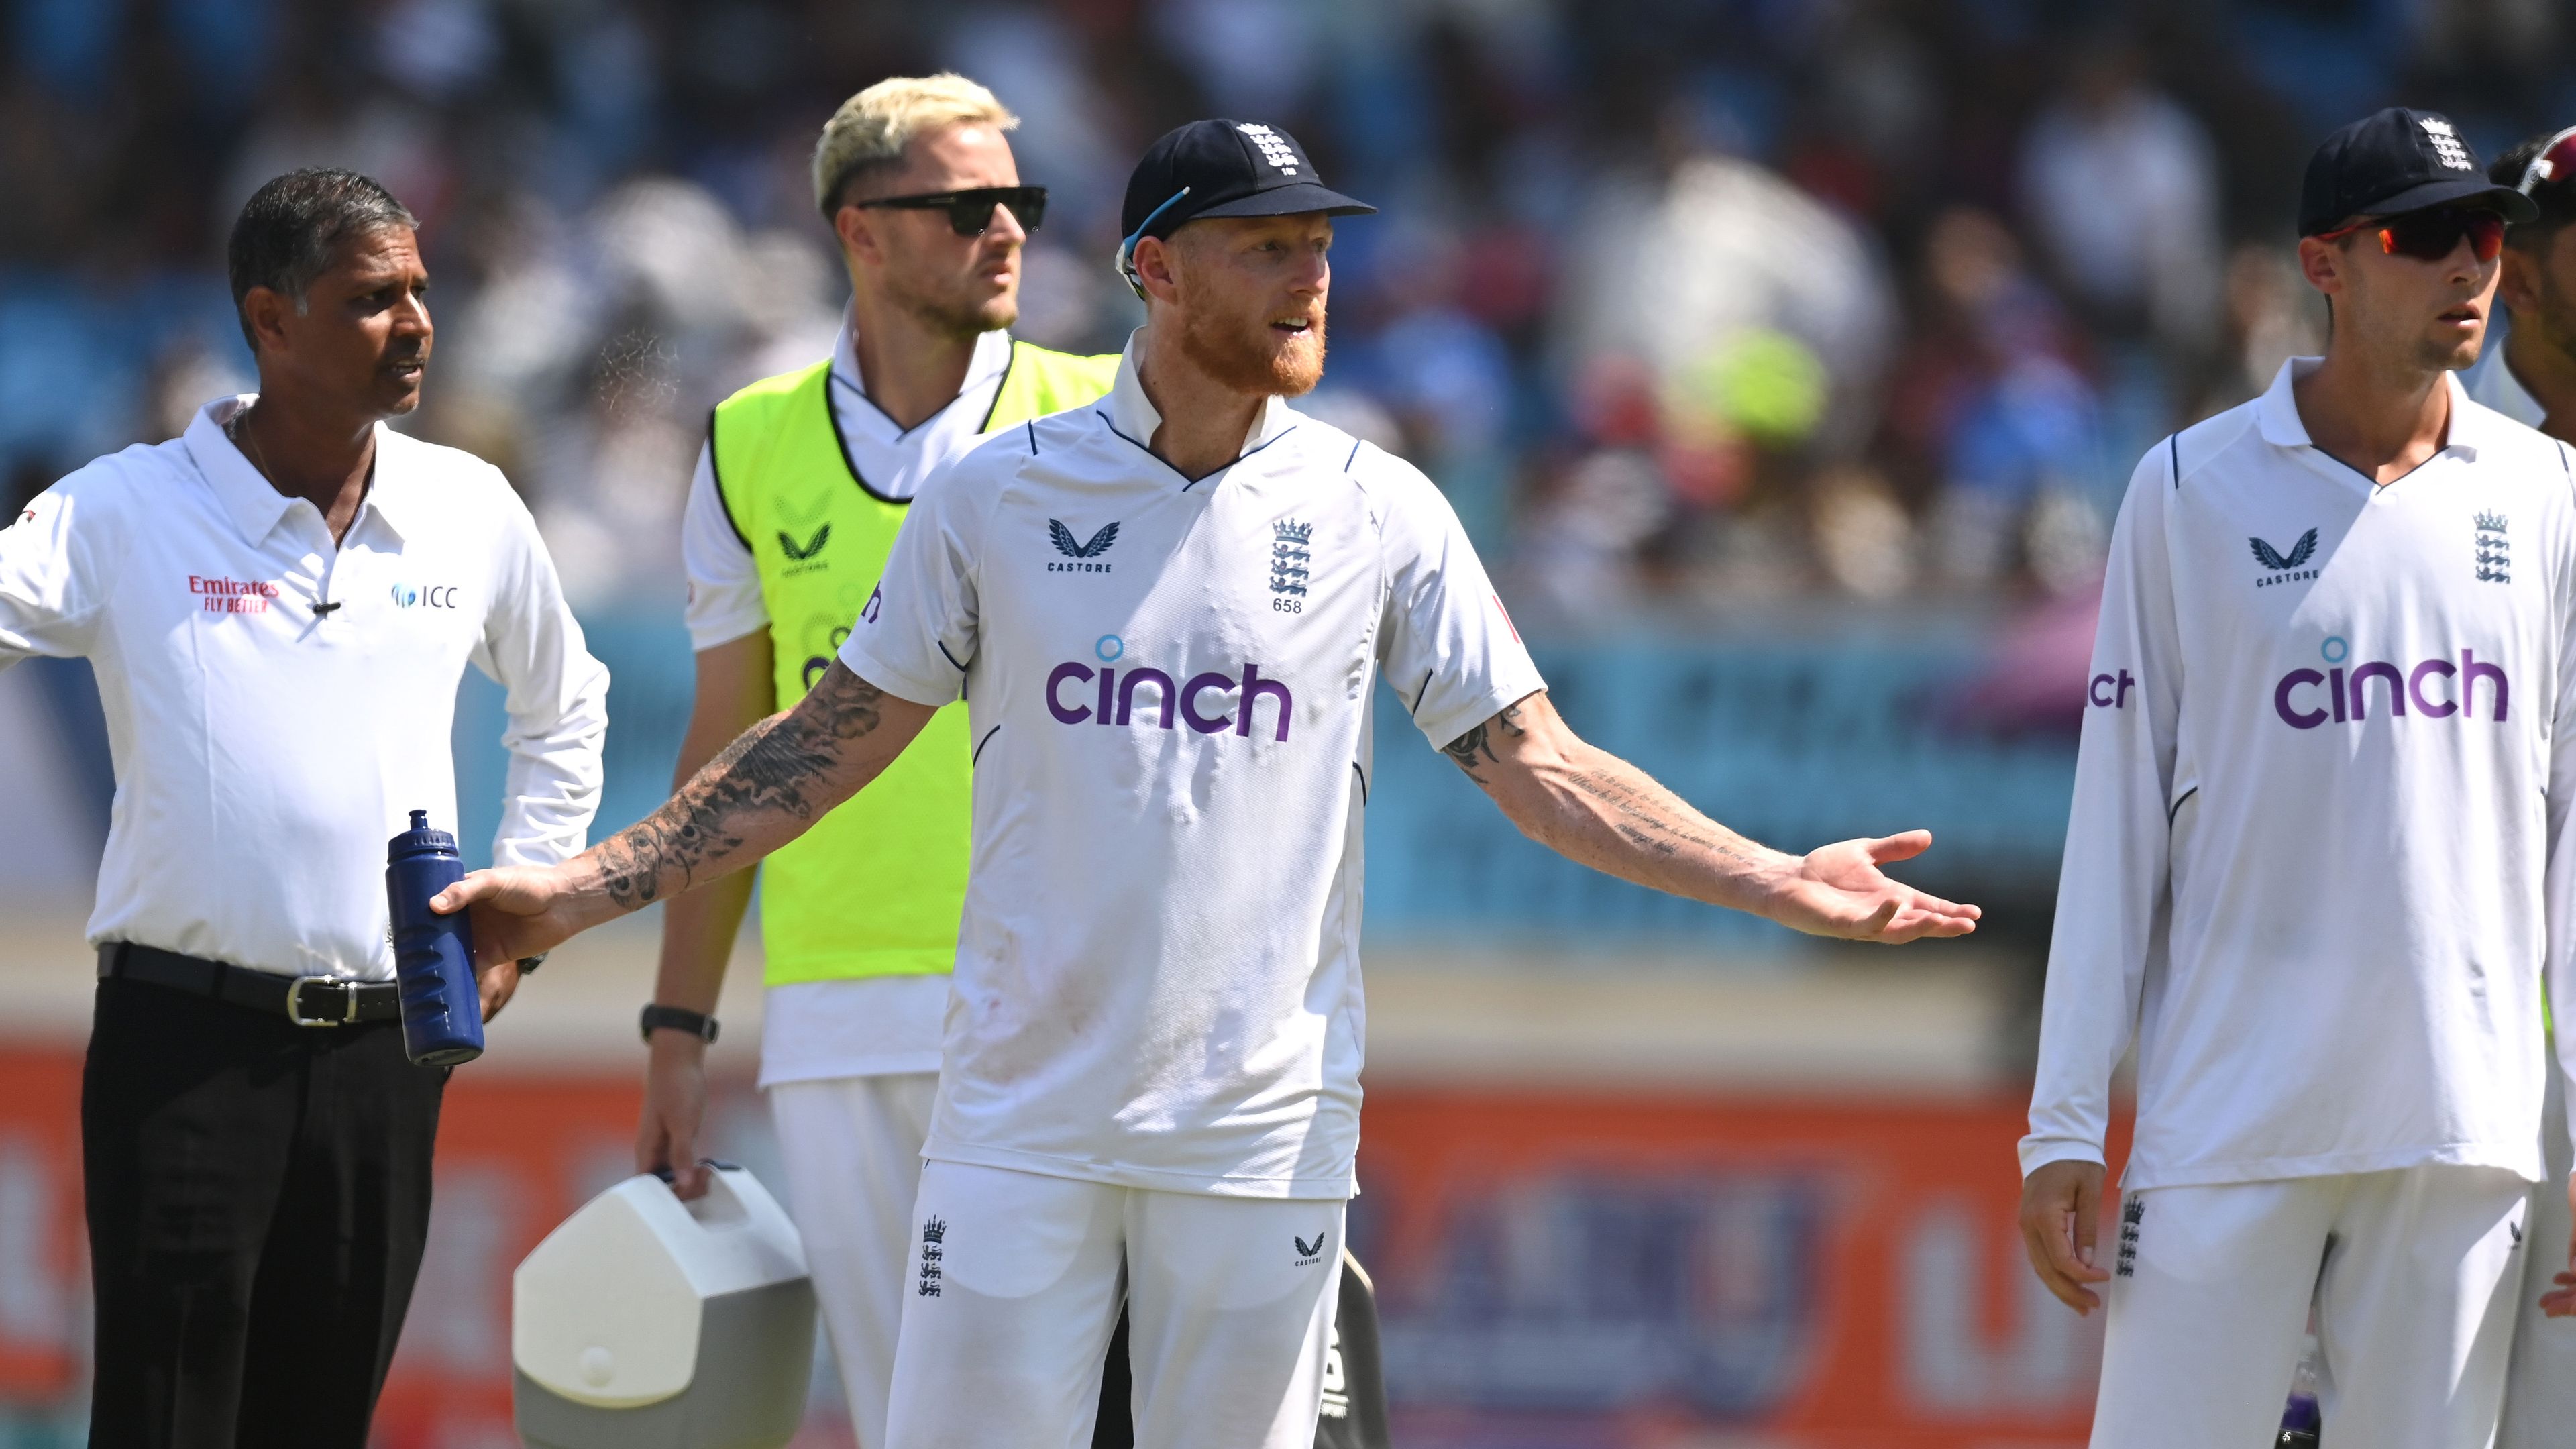 'Not the first team': Michael Clarke hits back at England over Bazball claim